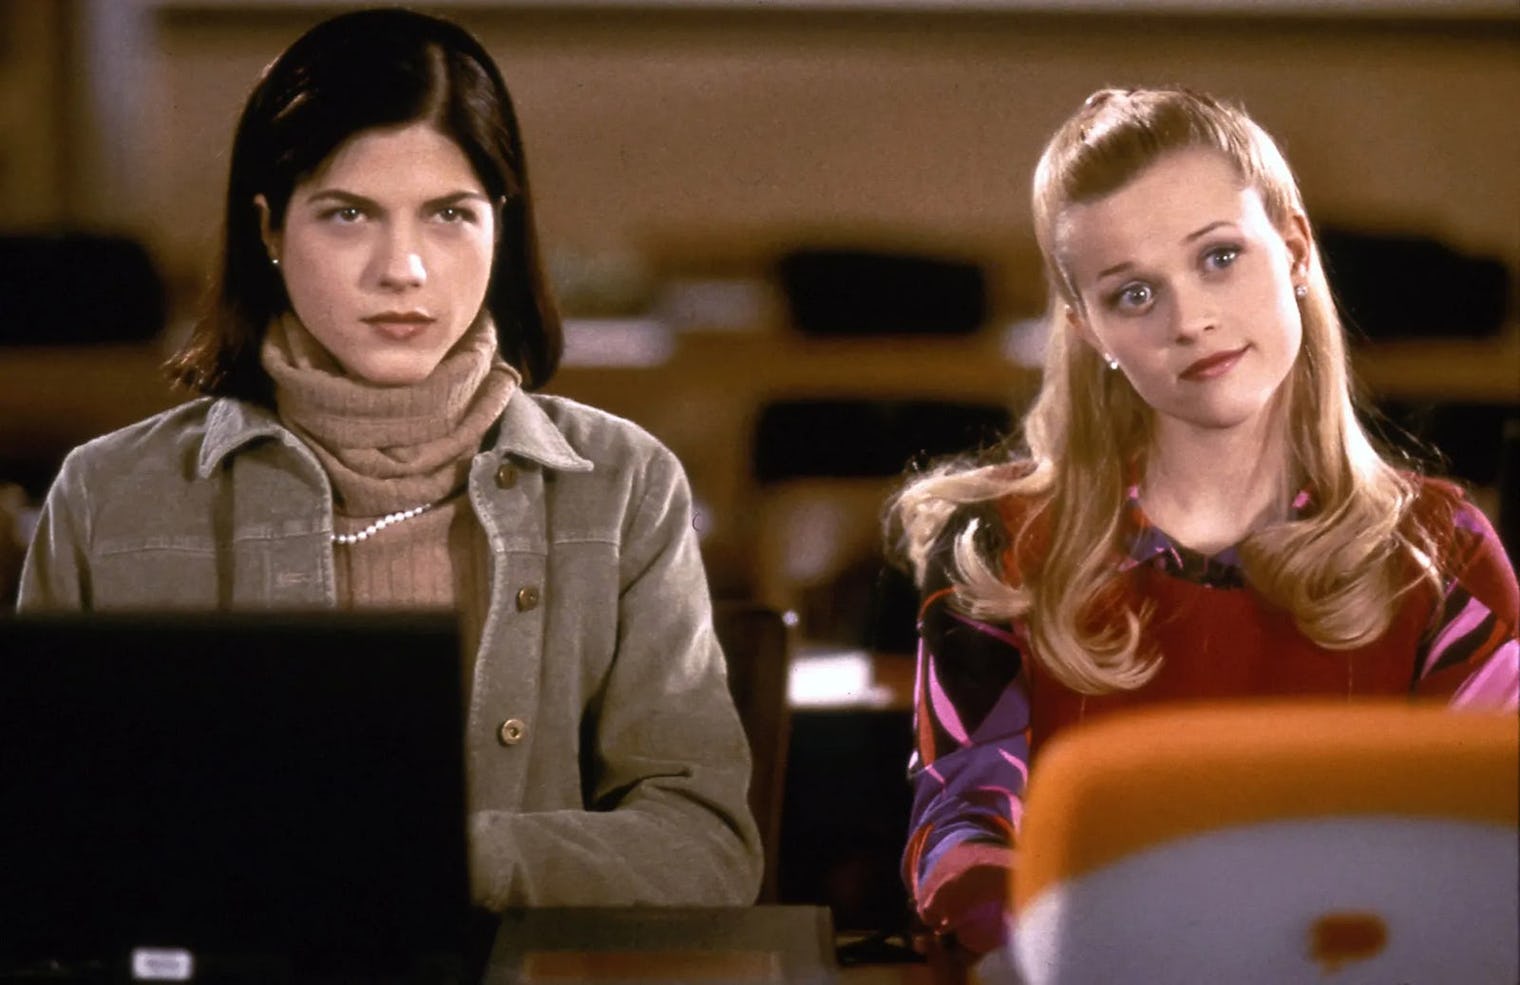 Selma Blair s Outfits In Legally Blonde Are Textbook Dark Academia